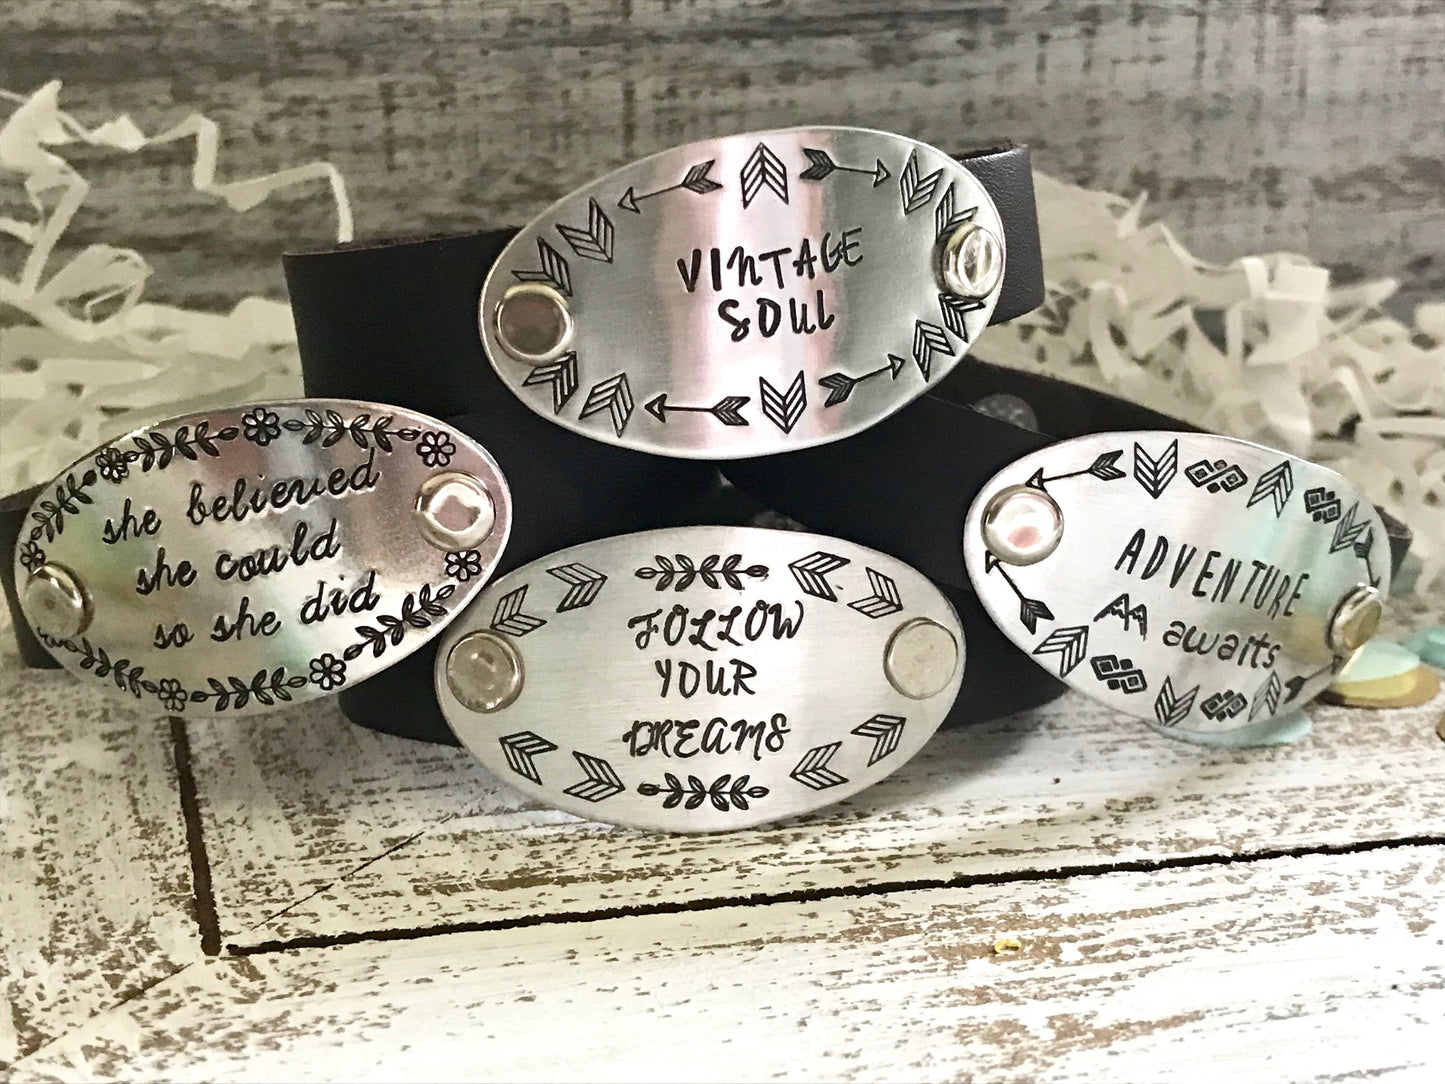 It was then that I carried you cuff bracelet--memorial bracelet--boho leather bracelet--memorial gift--memorial jewelry--gift for her